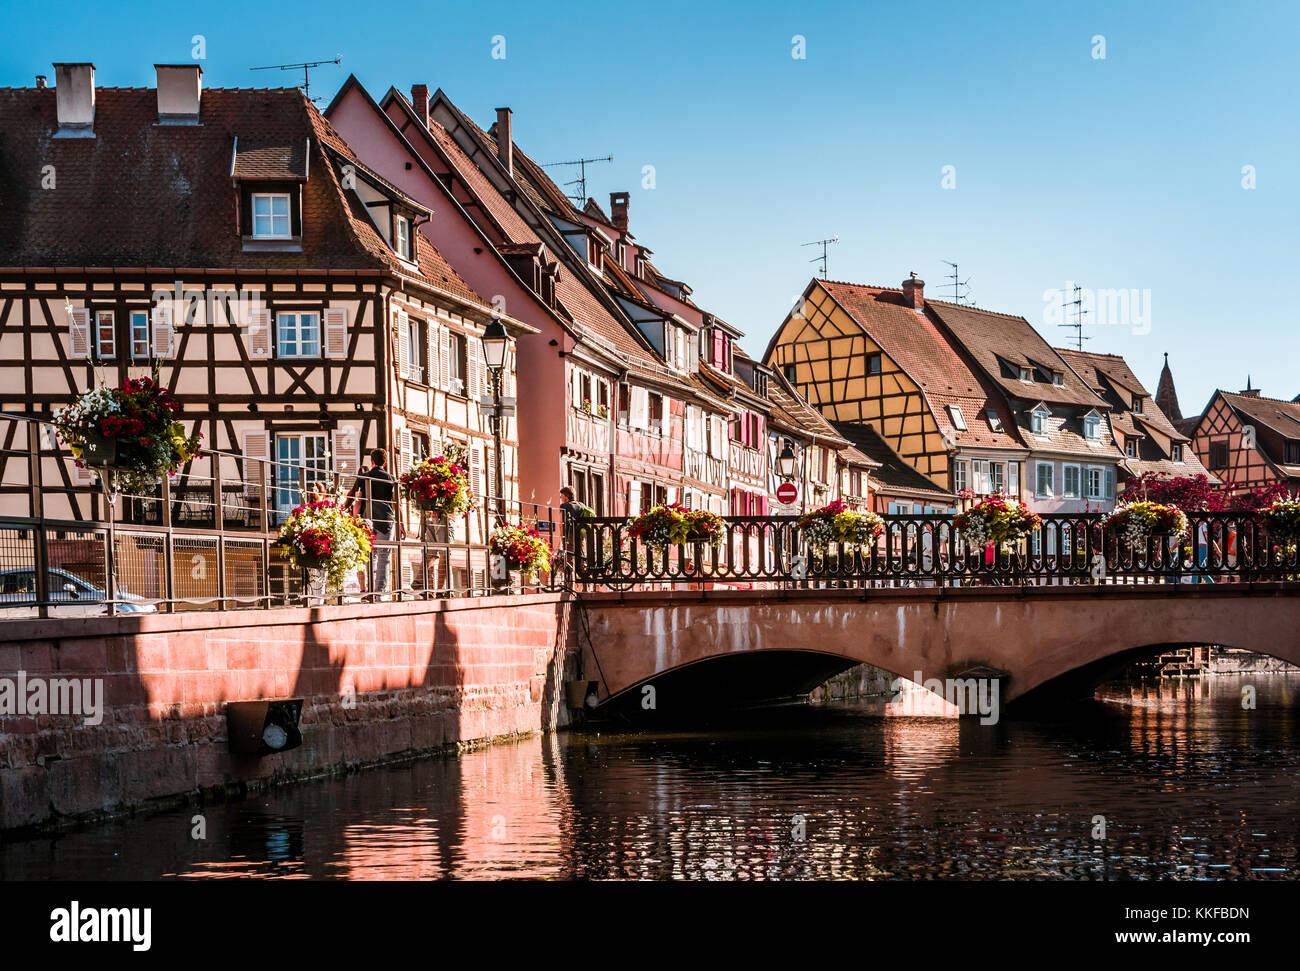 Beautiful town of Colmar in Alsace province of France on a summer sunny day Stock Photo